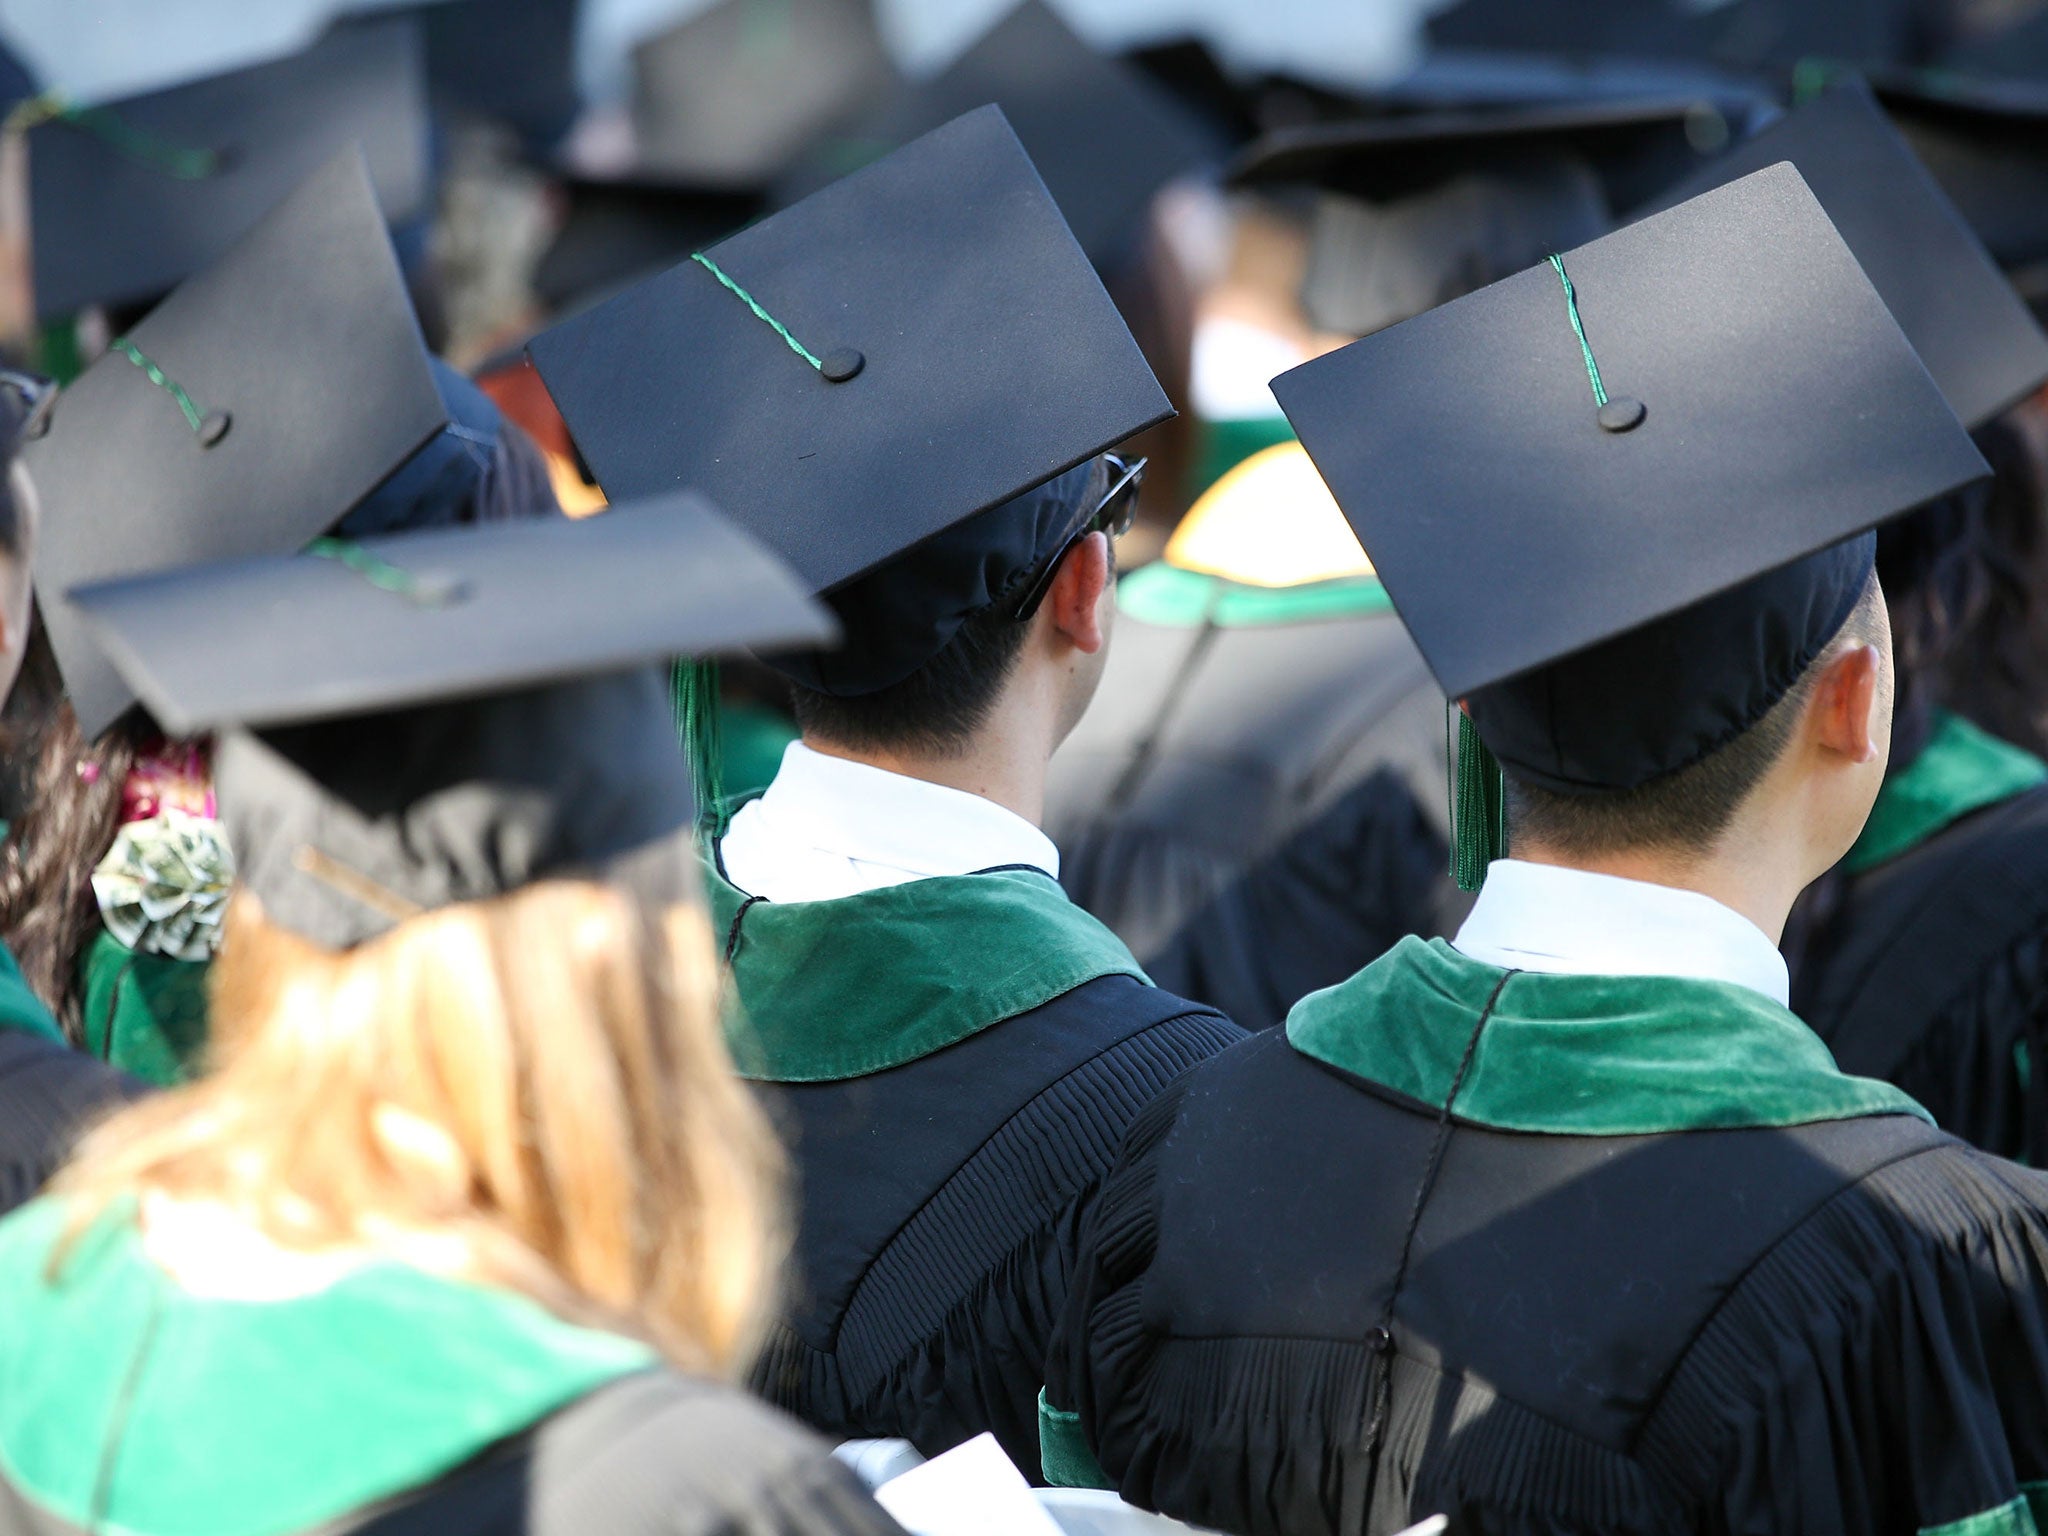 The head of the universities’ fair access watchdog has said that too many disadvantaged students are still dropping out or failing to get top degree passes despite a rise in their acceptance rates